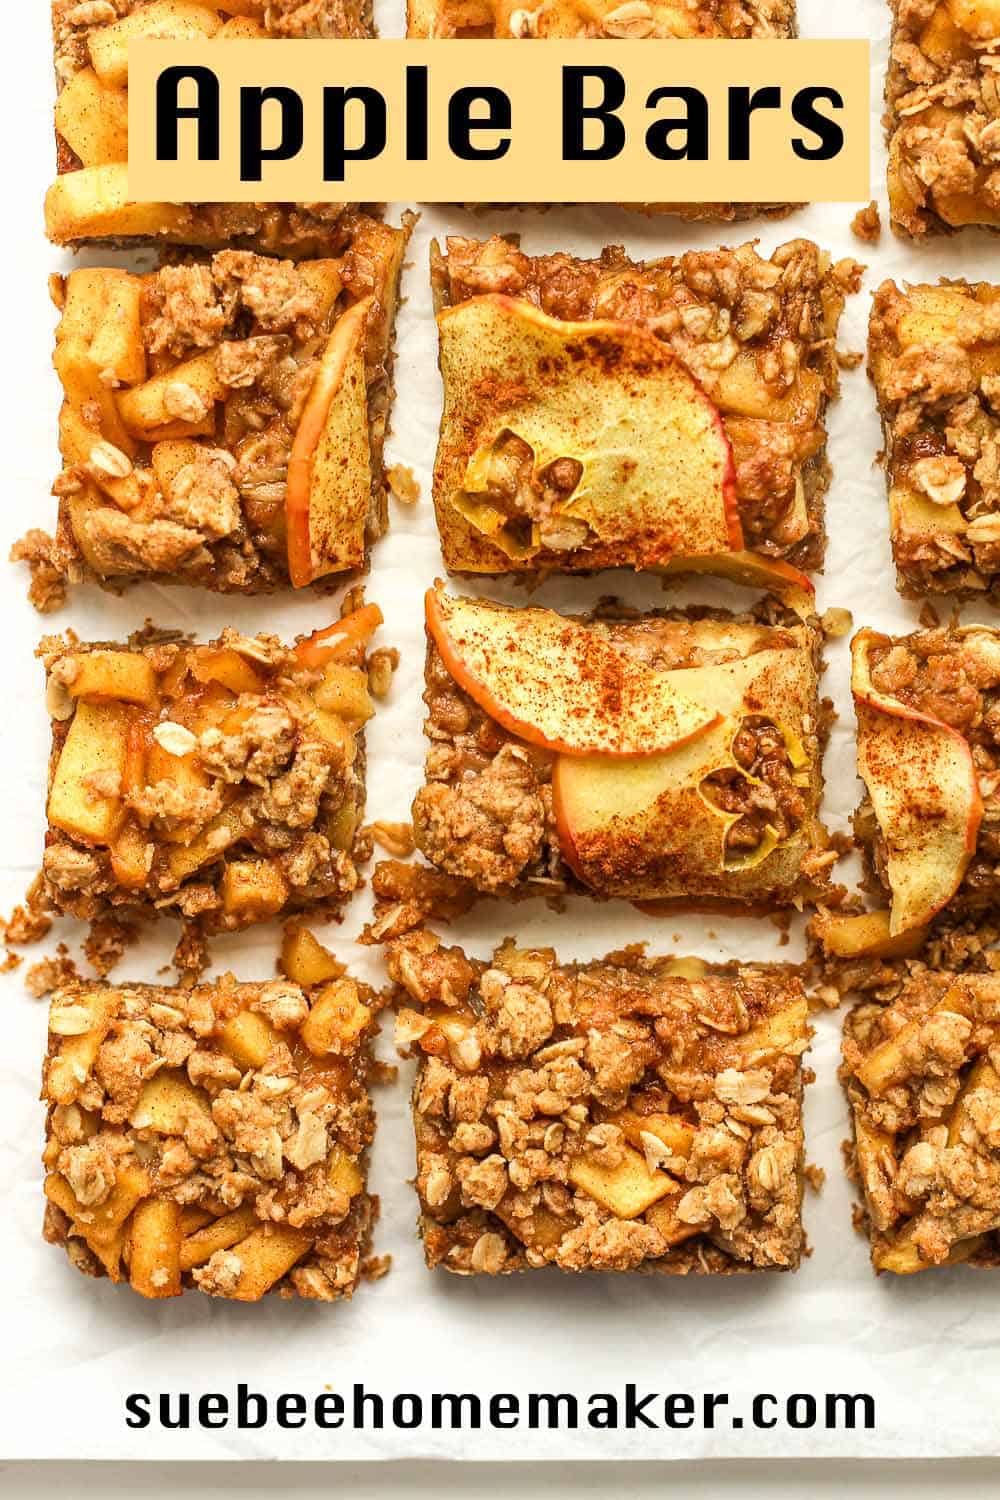 Some apple bars just cut into pieces.